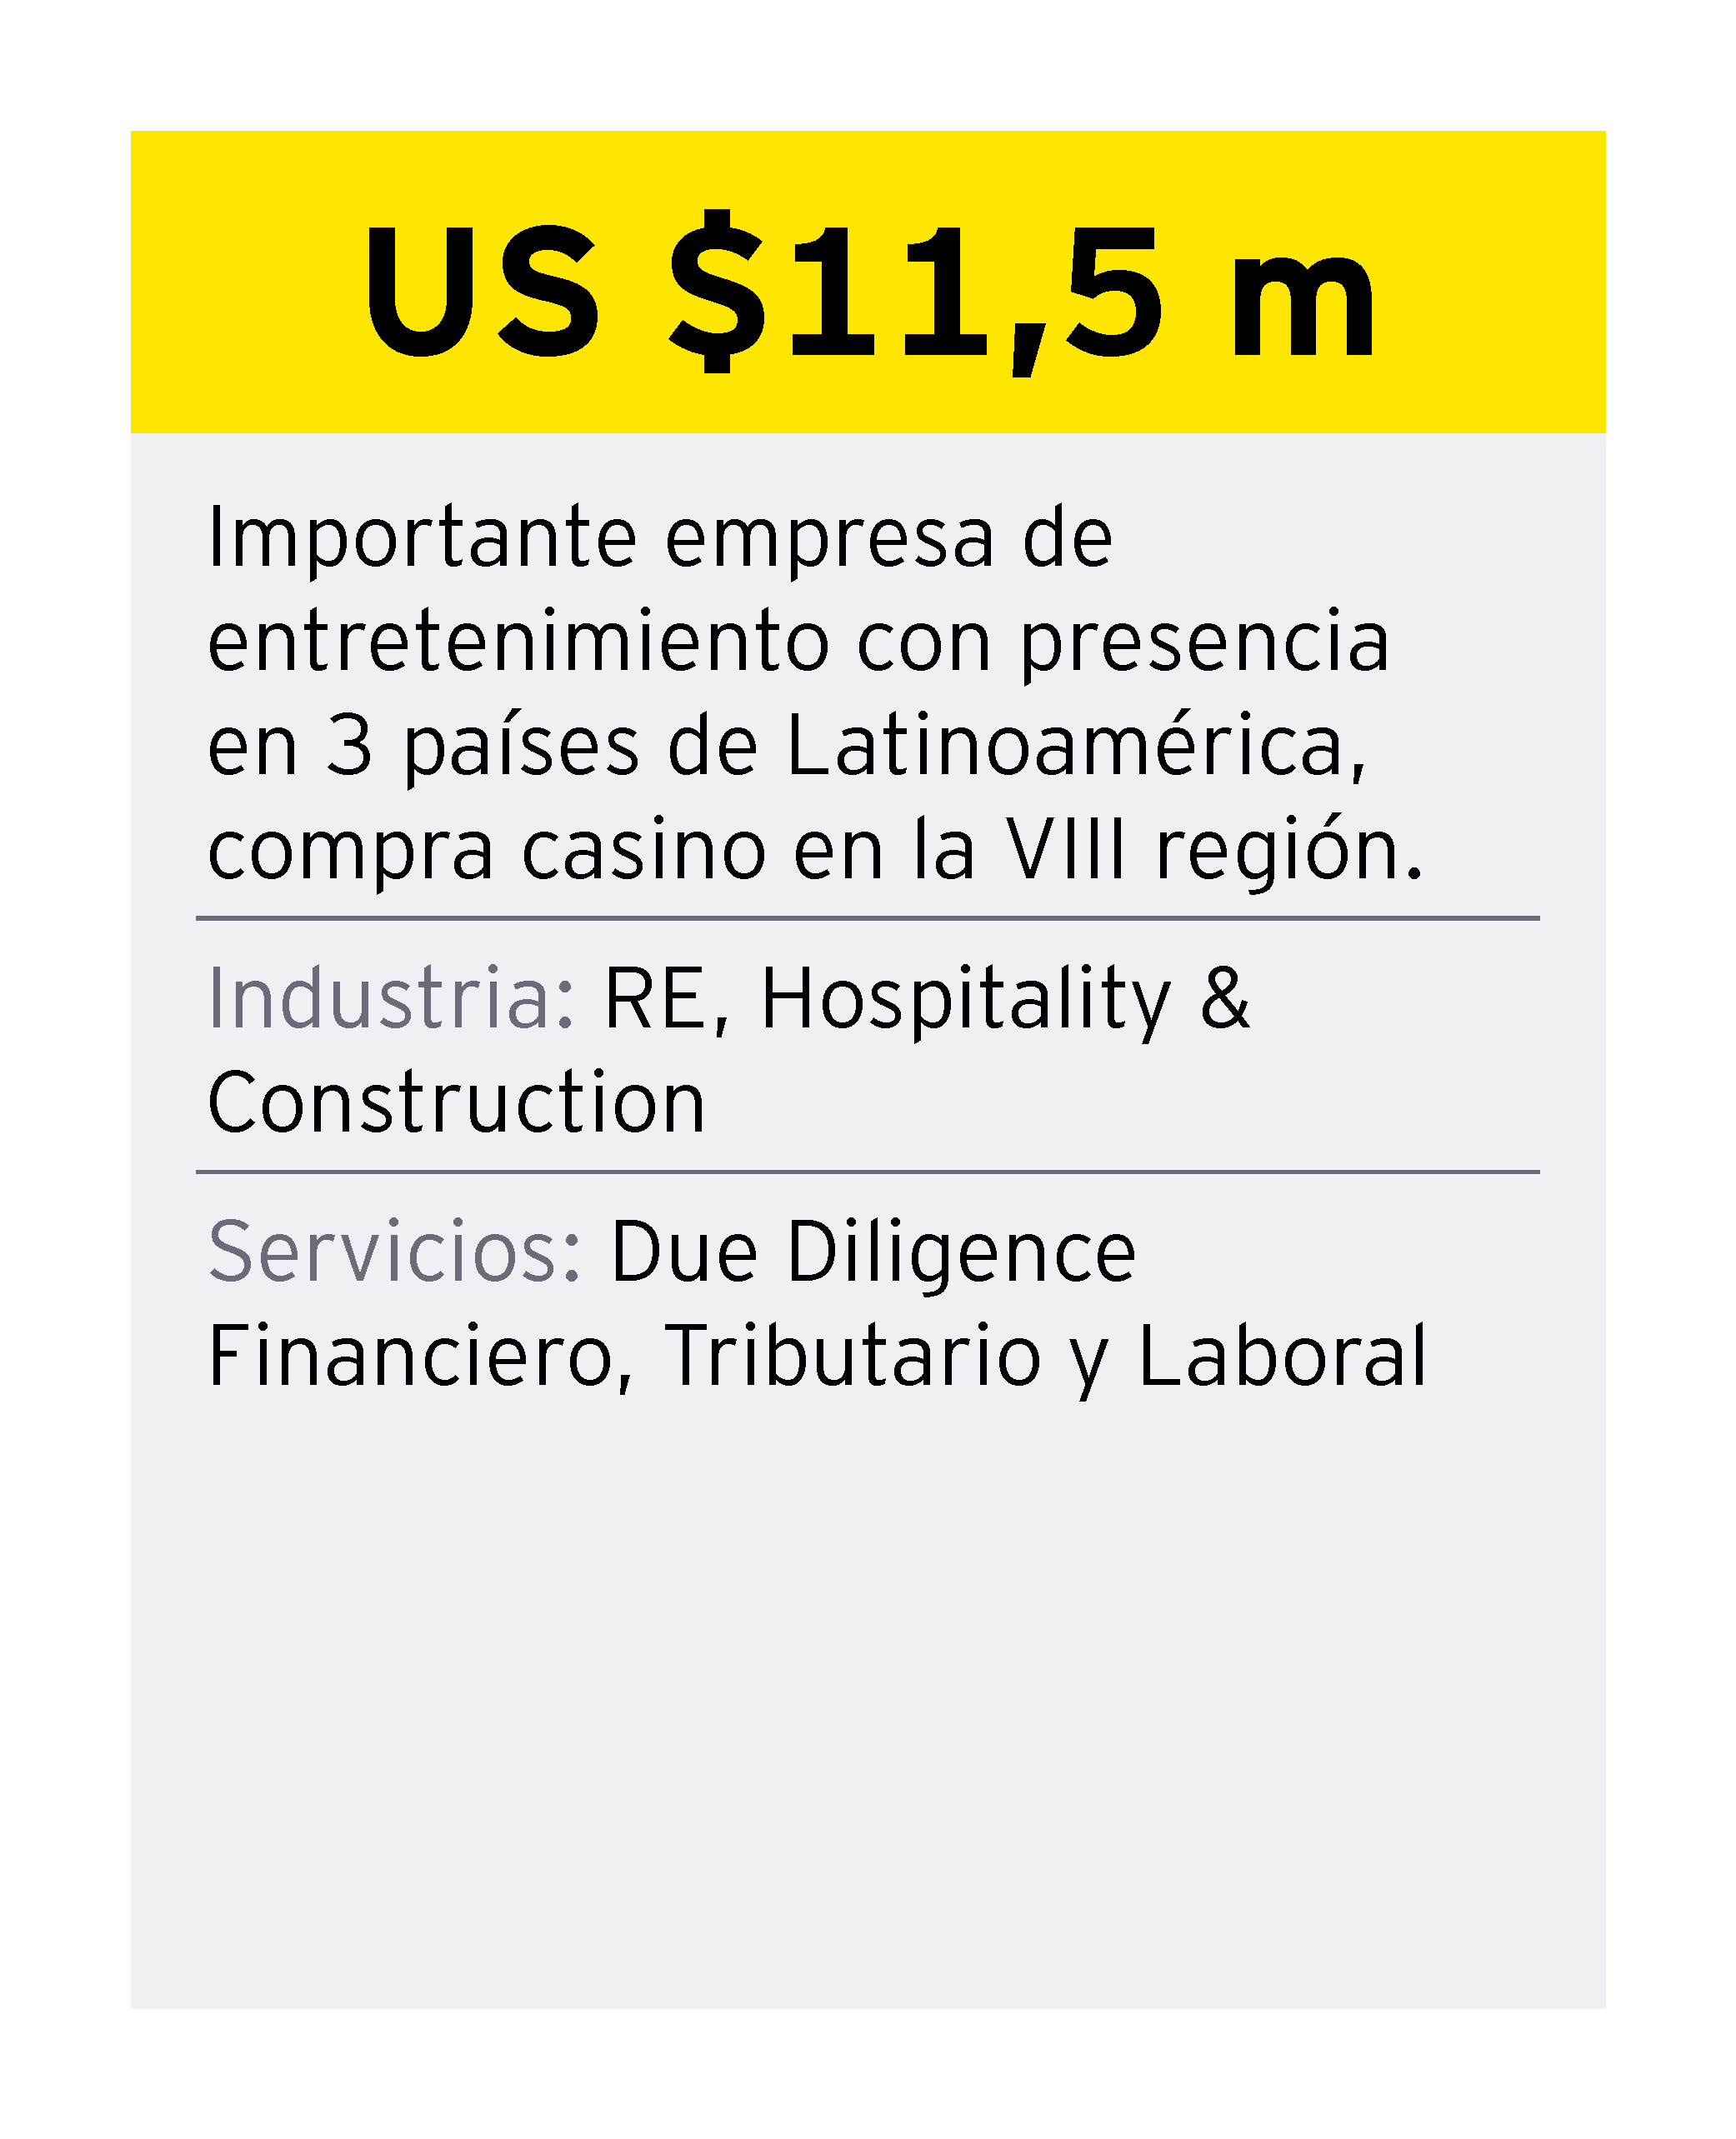 ey-chile-credencial-3-real-estate-hospitality-construction